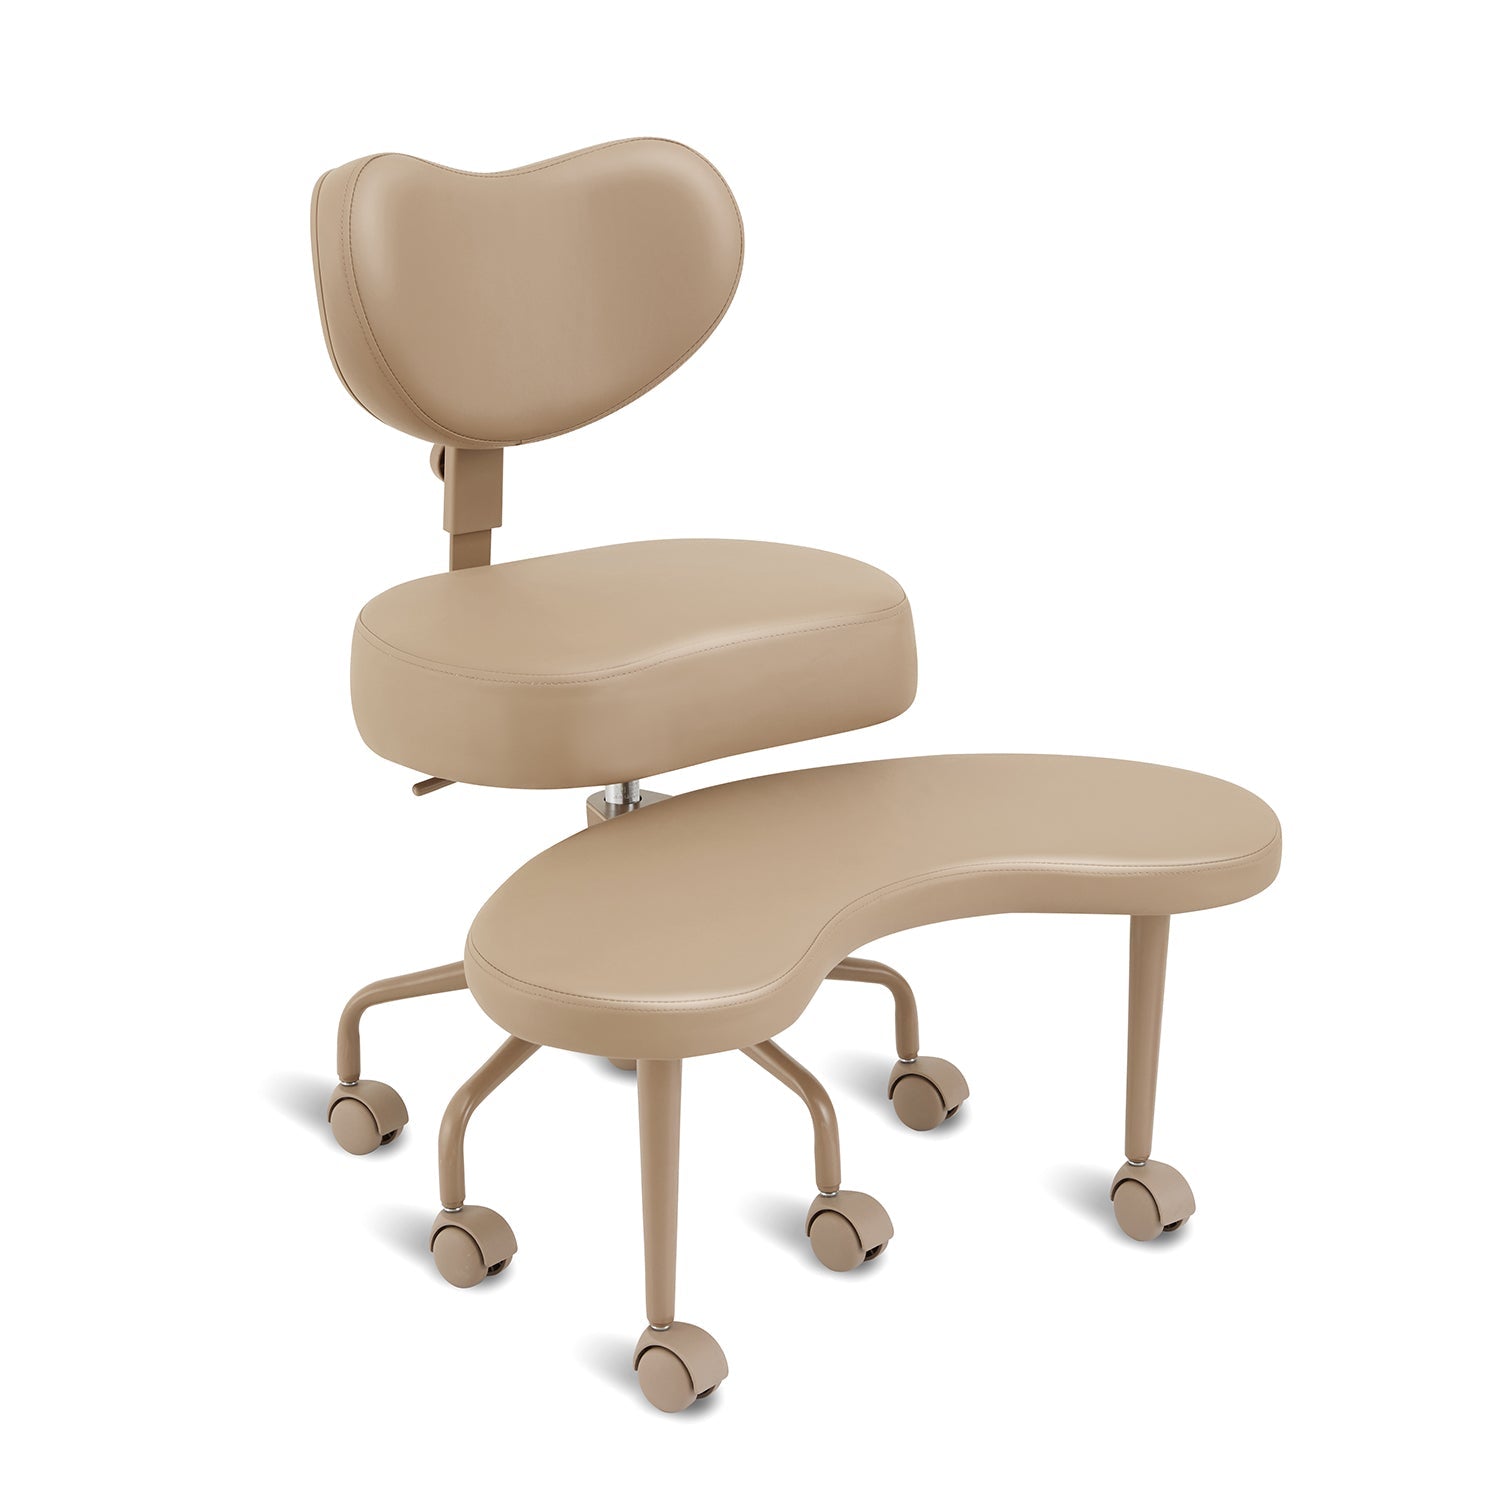 Polideal Meditation Chair - Pro